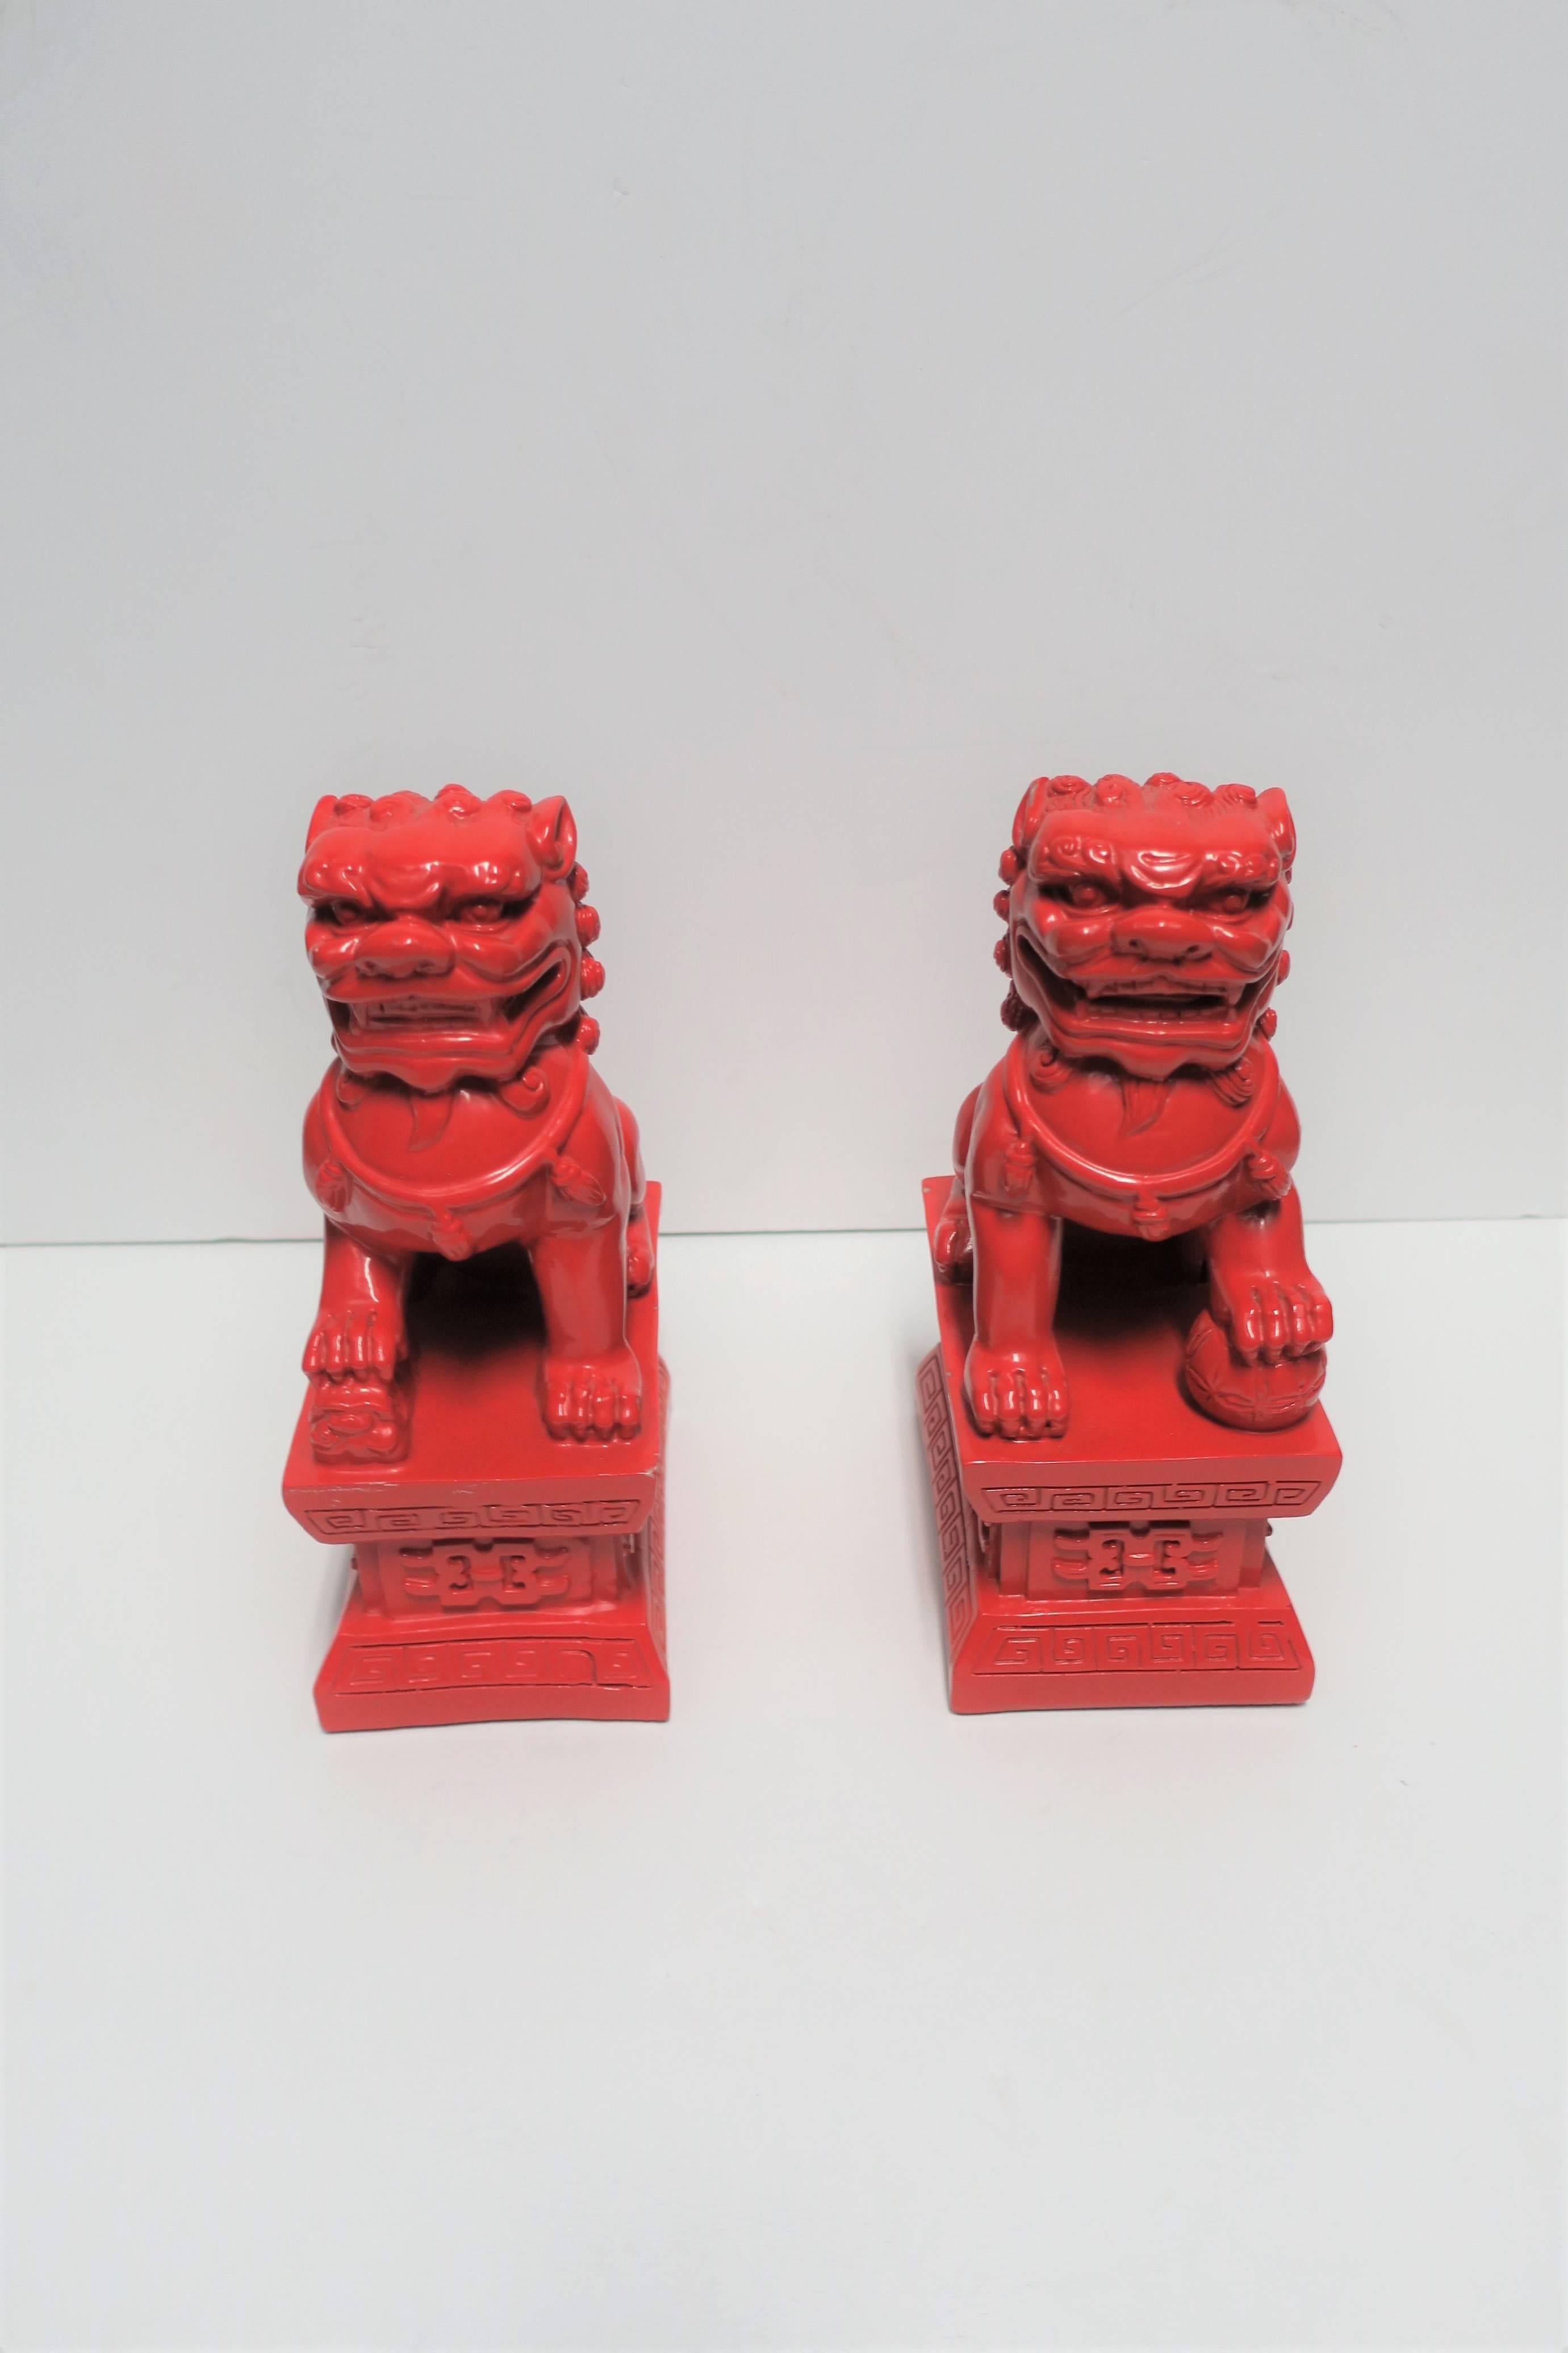 foo dog bookends